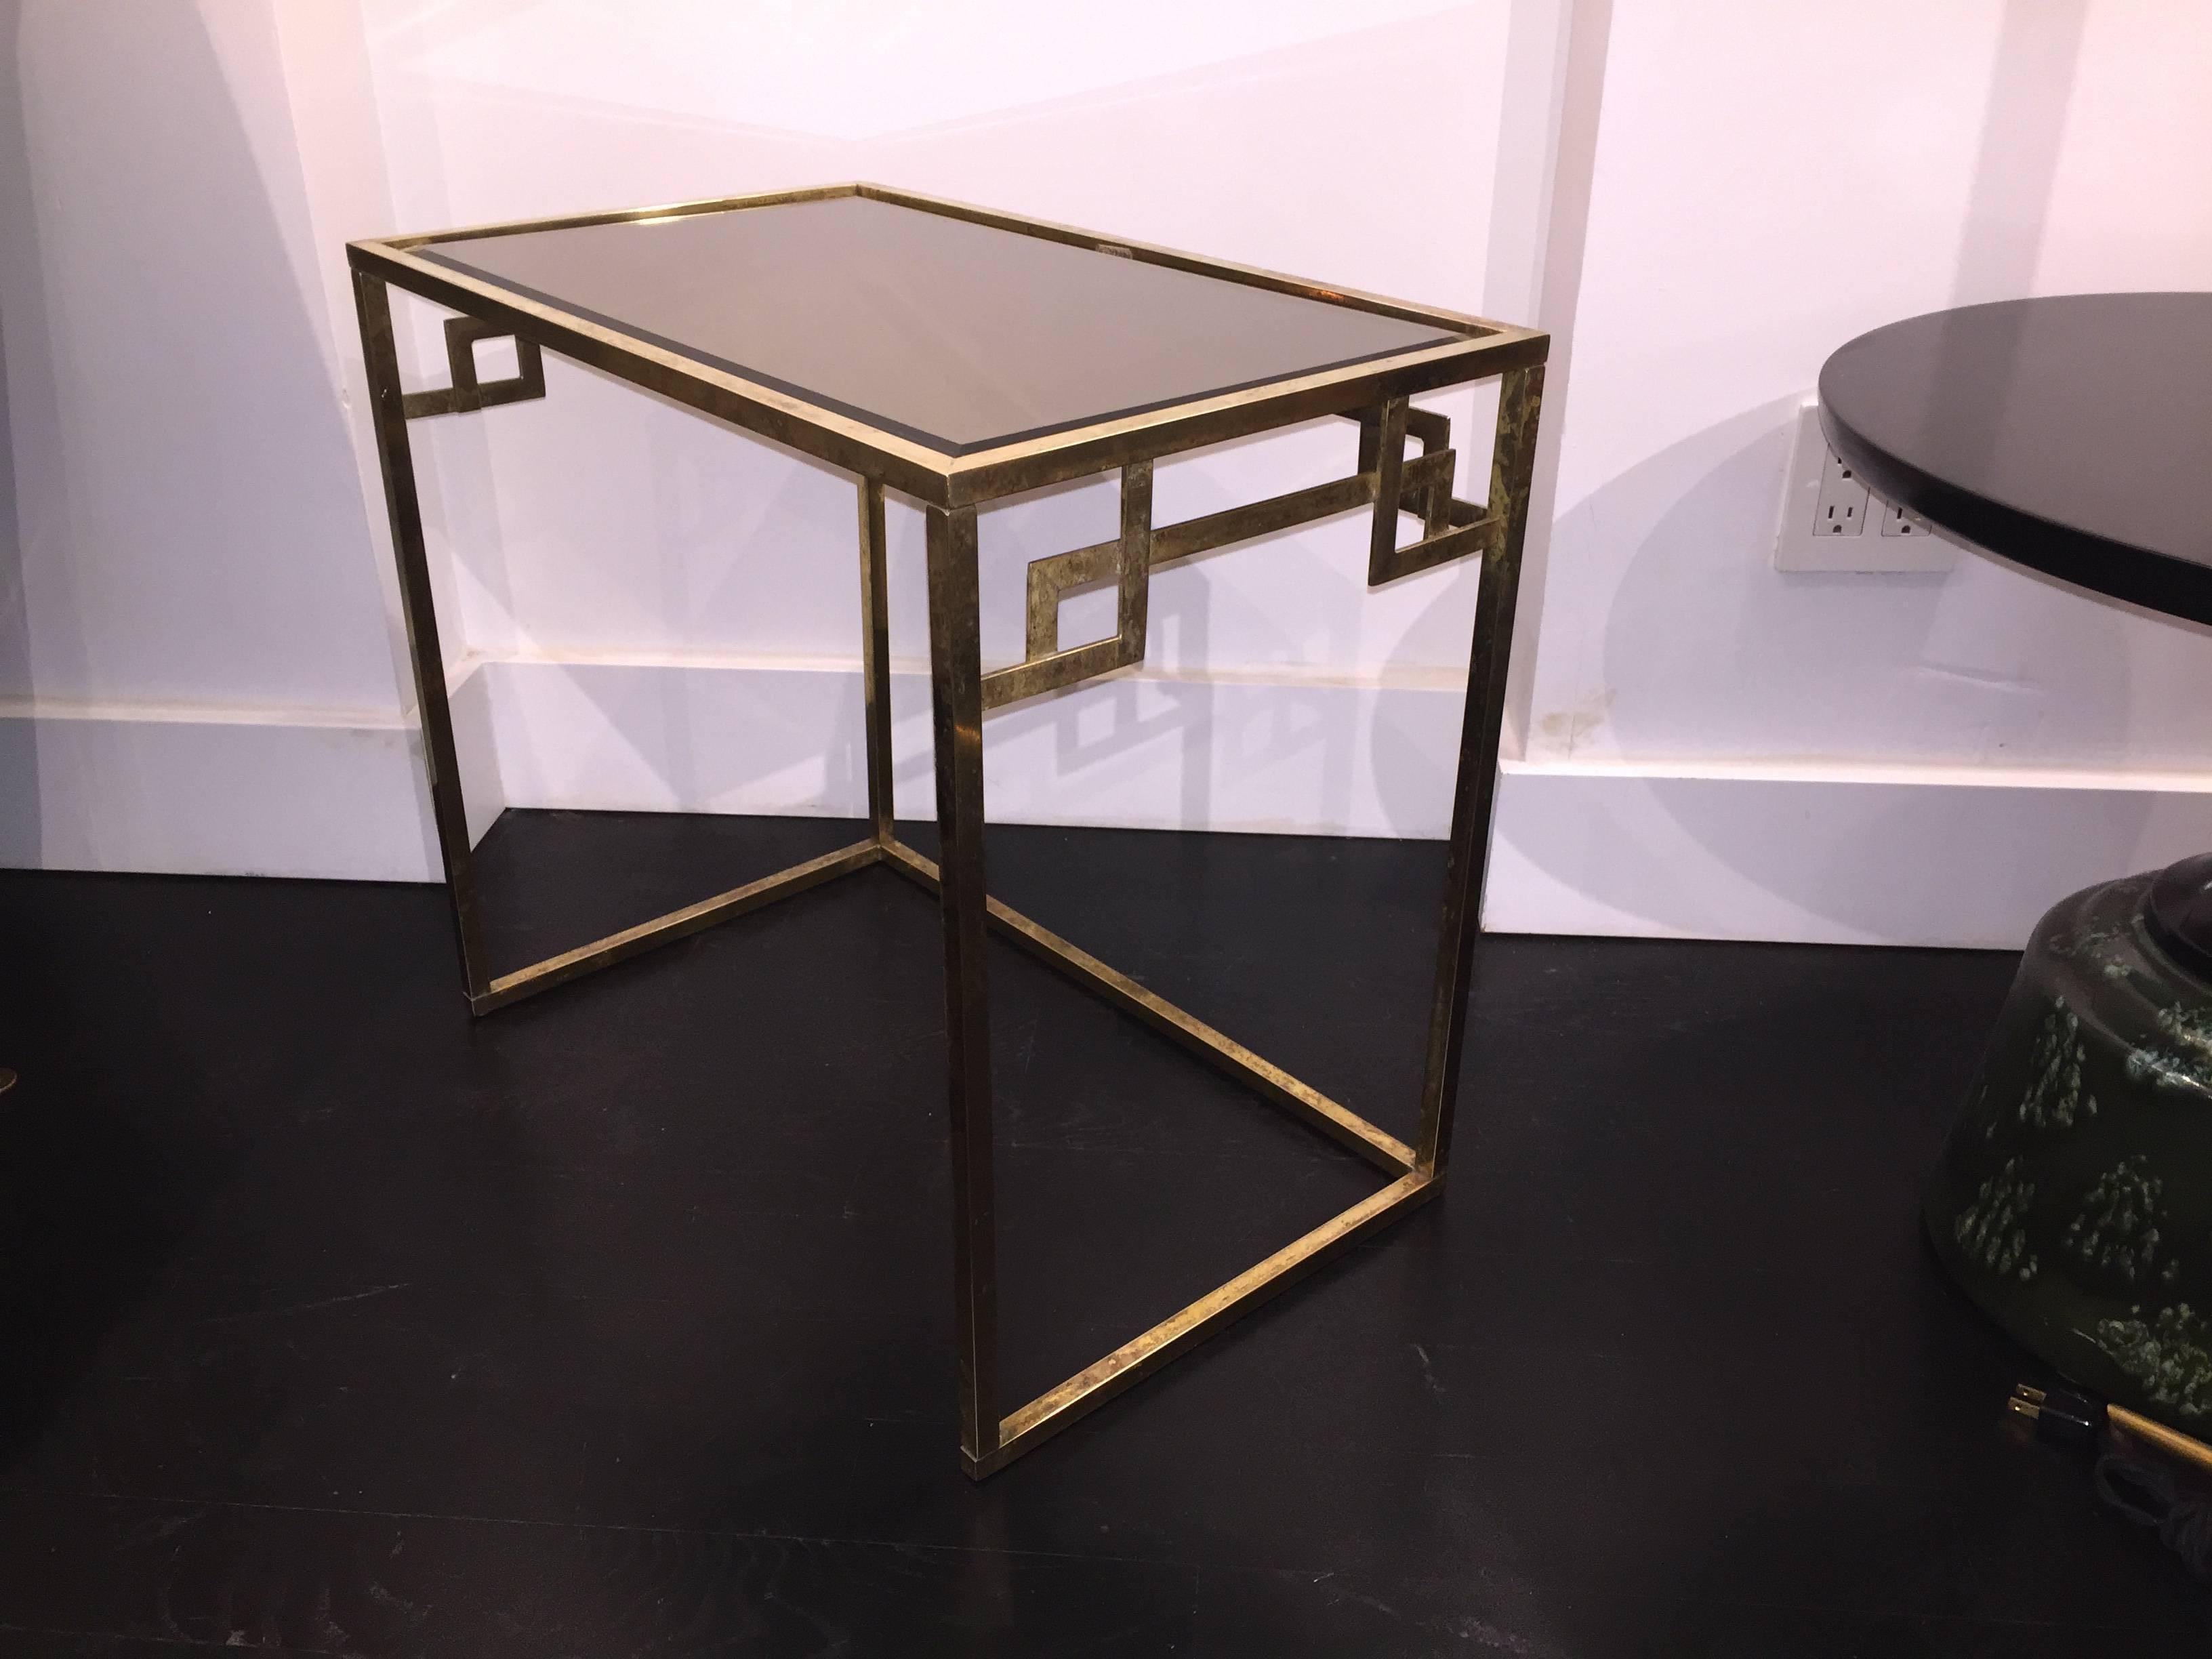 Italian brass nesting tables from the 1960s with Greek key design and original smoked glass tops. The nesting tables are kept in their original finish and glass tops have chips on some corners. Open to customization on request.